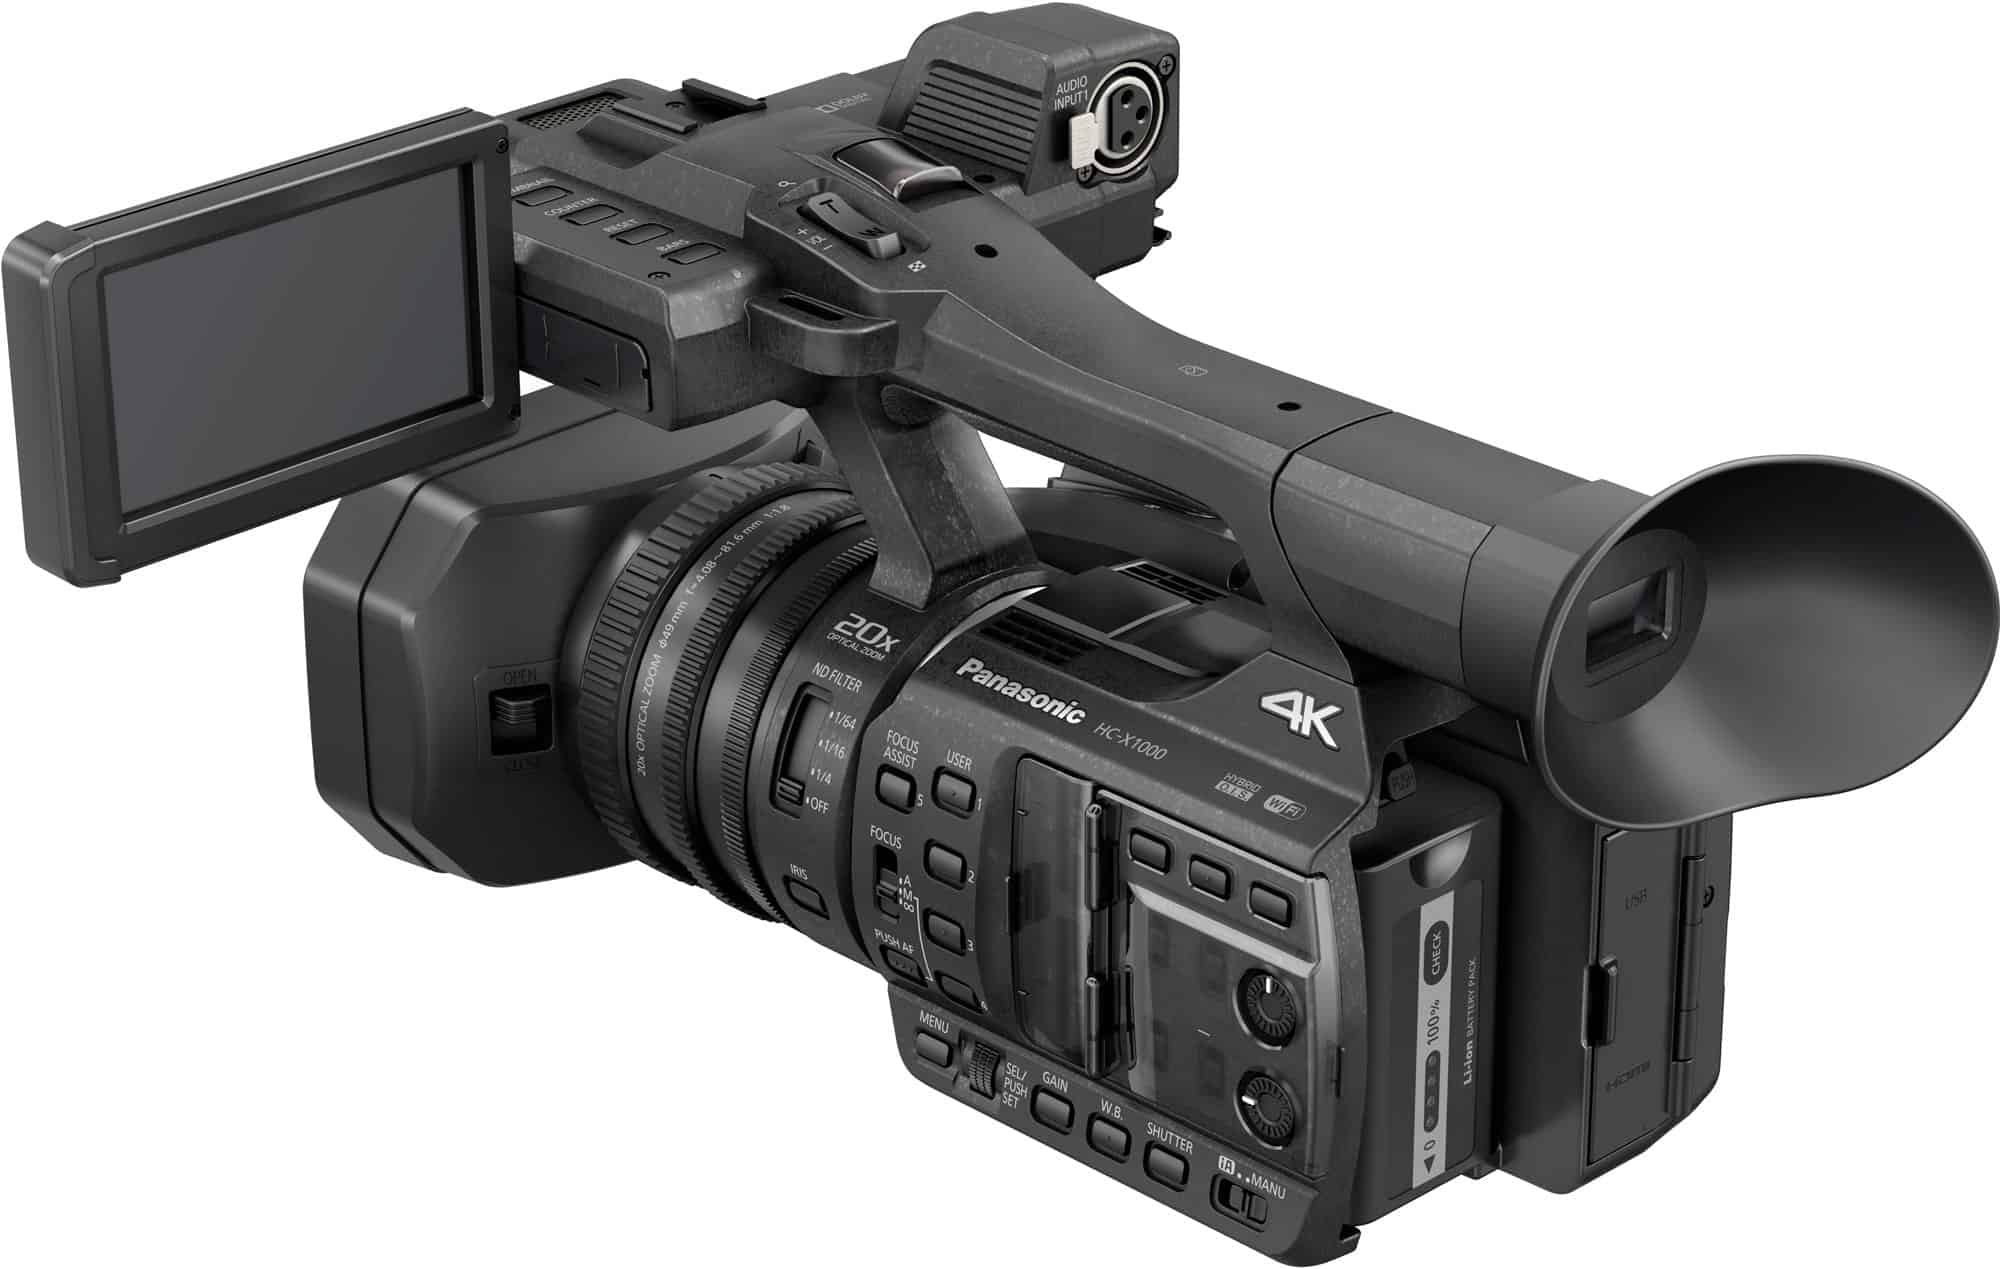 First Look: New Panasonic HC-X1000 4K Camcorder, Packed with